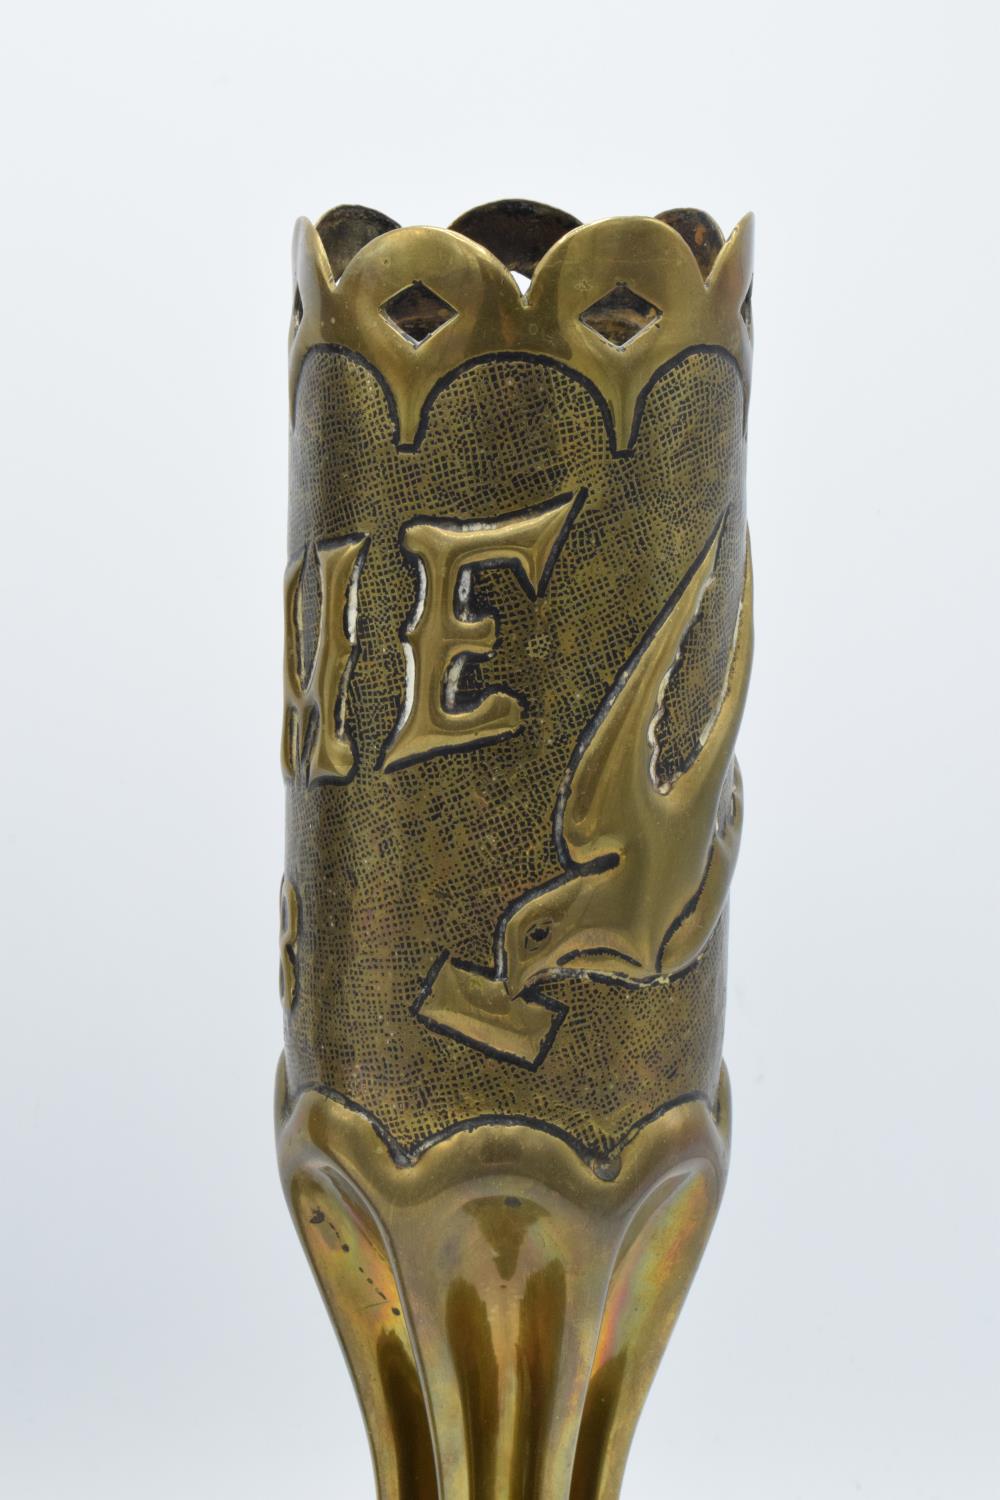 World War One trench art shell cases marked Ypres 1918 and Somme 1918 together with a small matchbox - Image 5 of 11